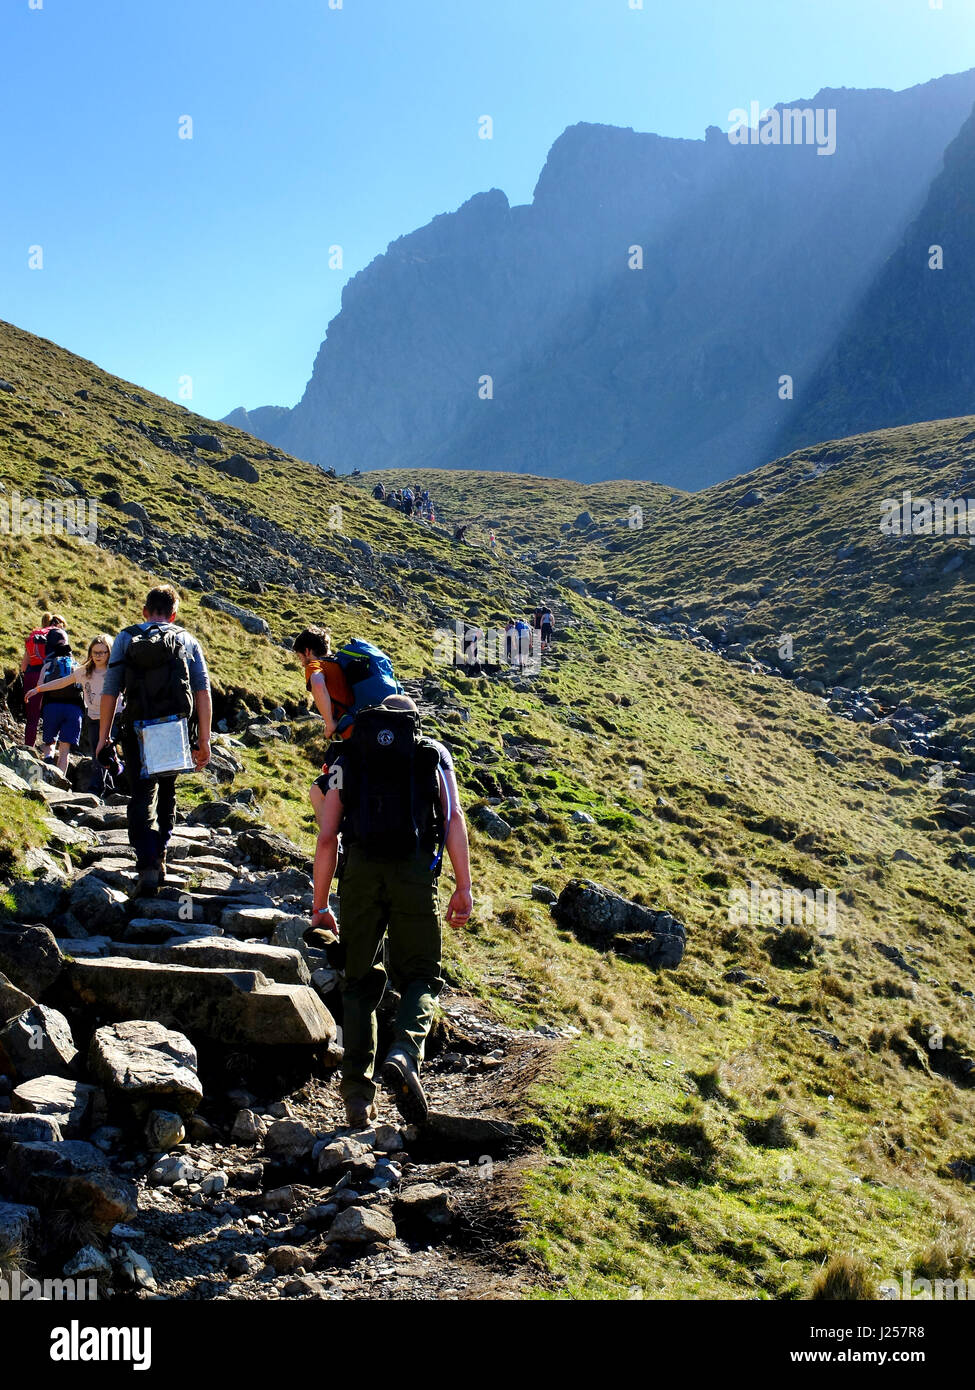 People hiking up to Scafell Pike in the Lade District, Cumbria, England's highest mountain. Stock Photo